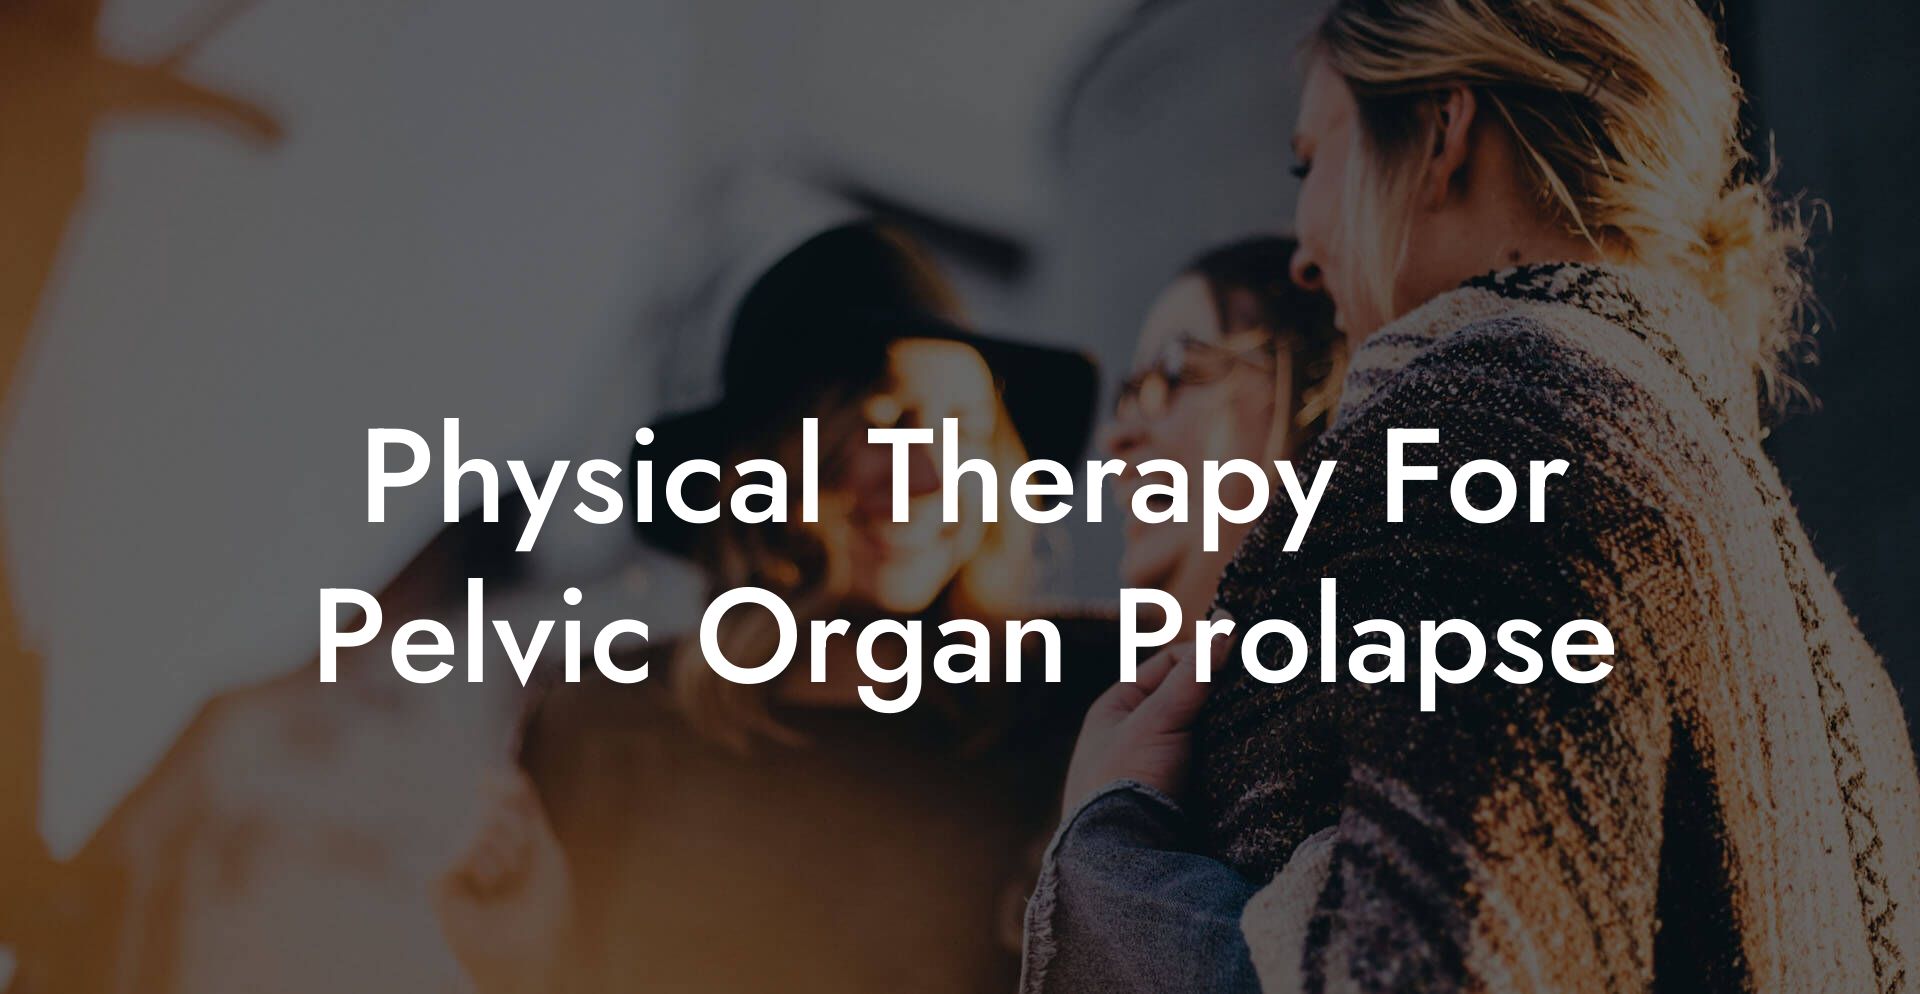 Physical Therapy For Pelvic Organ Prolapse